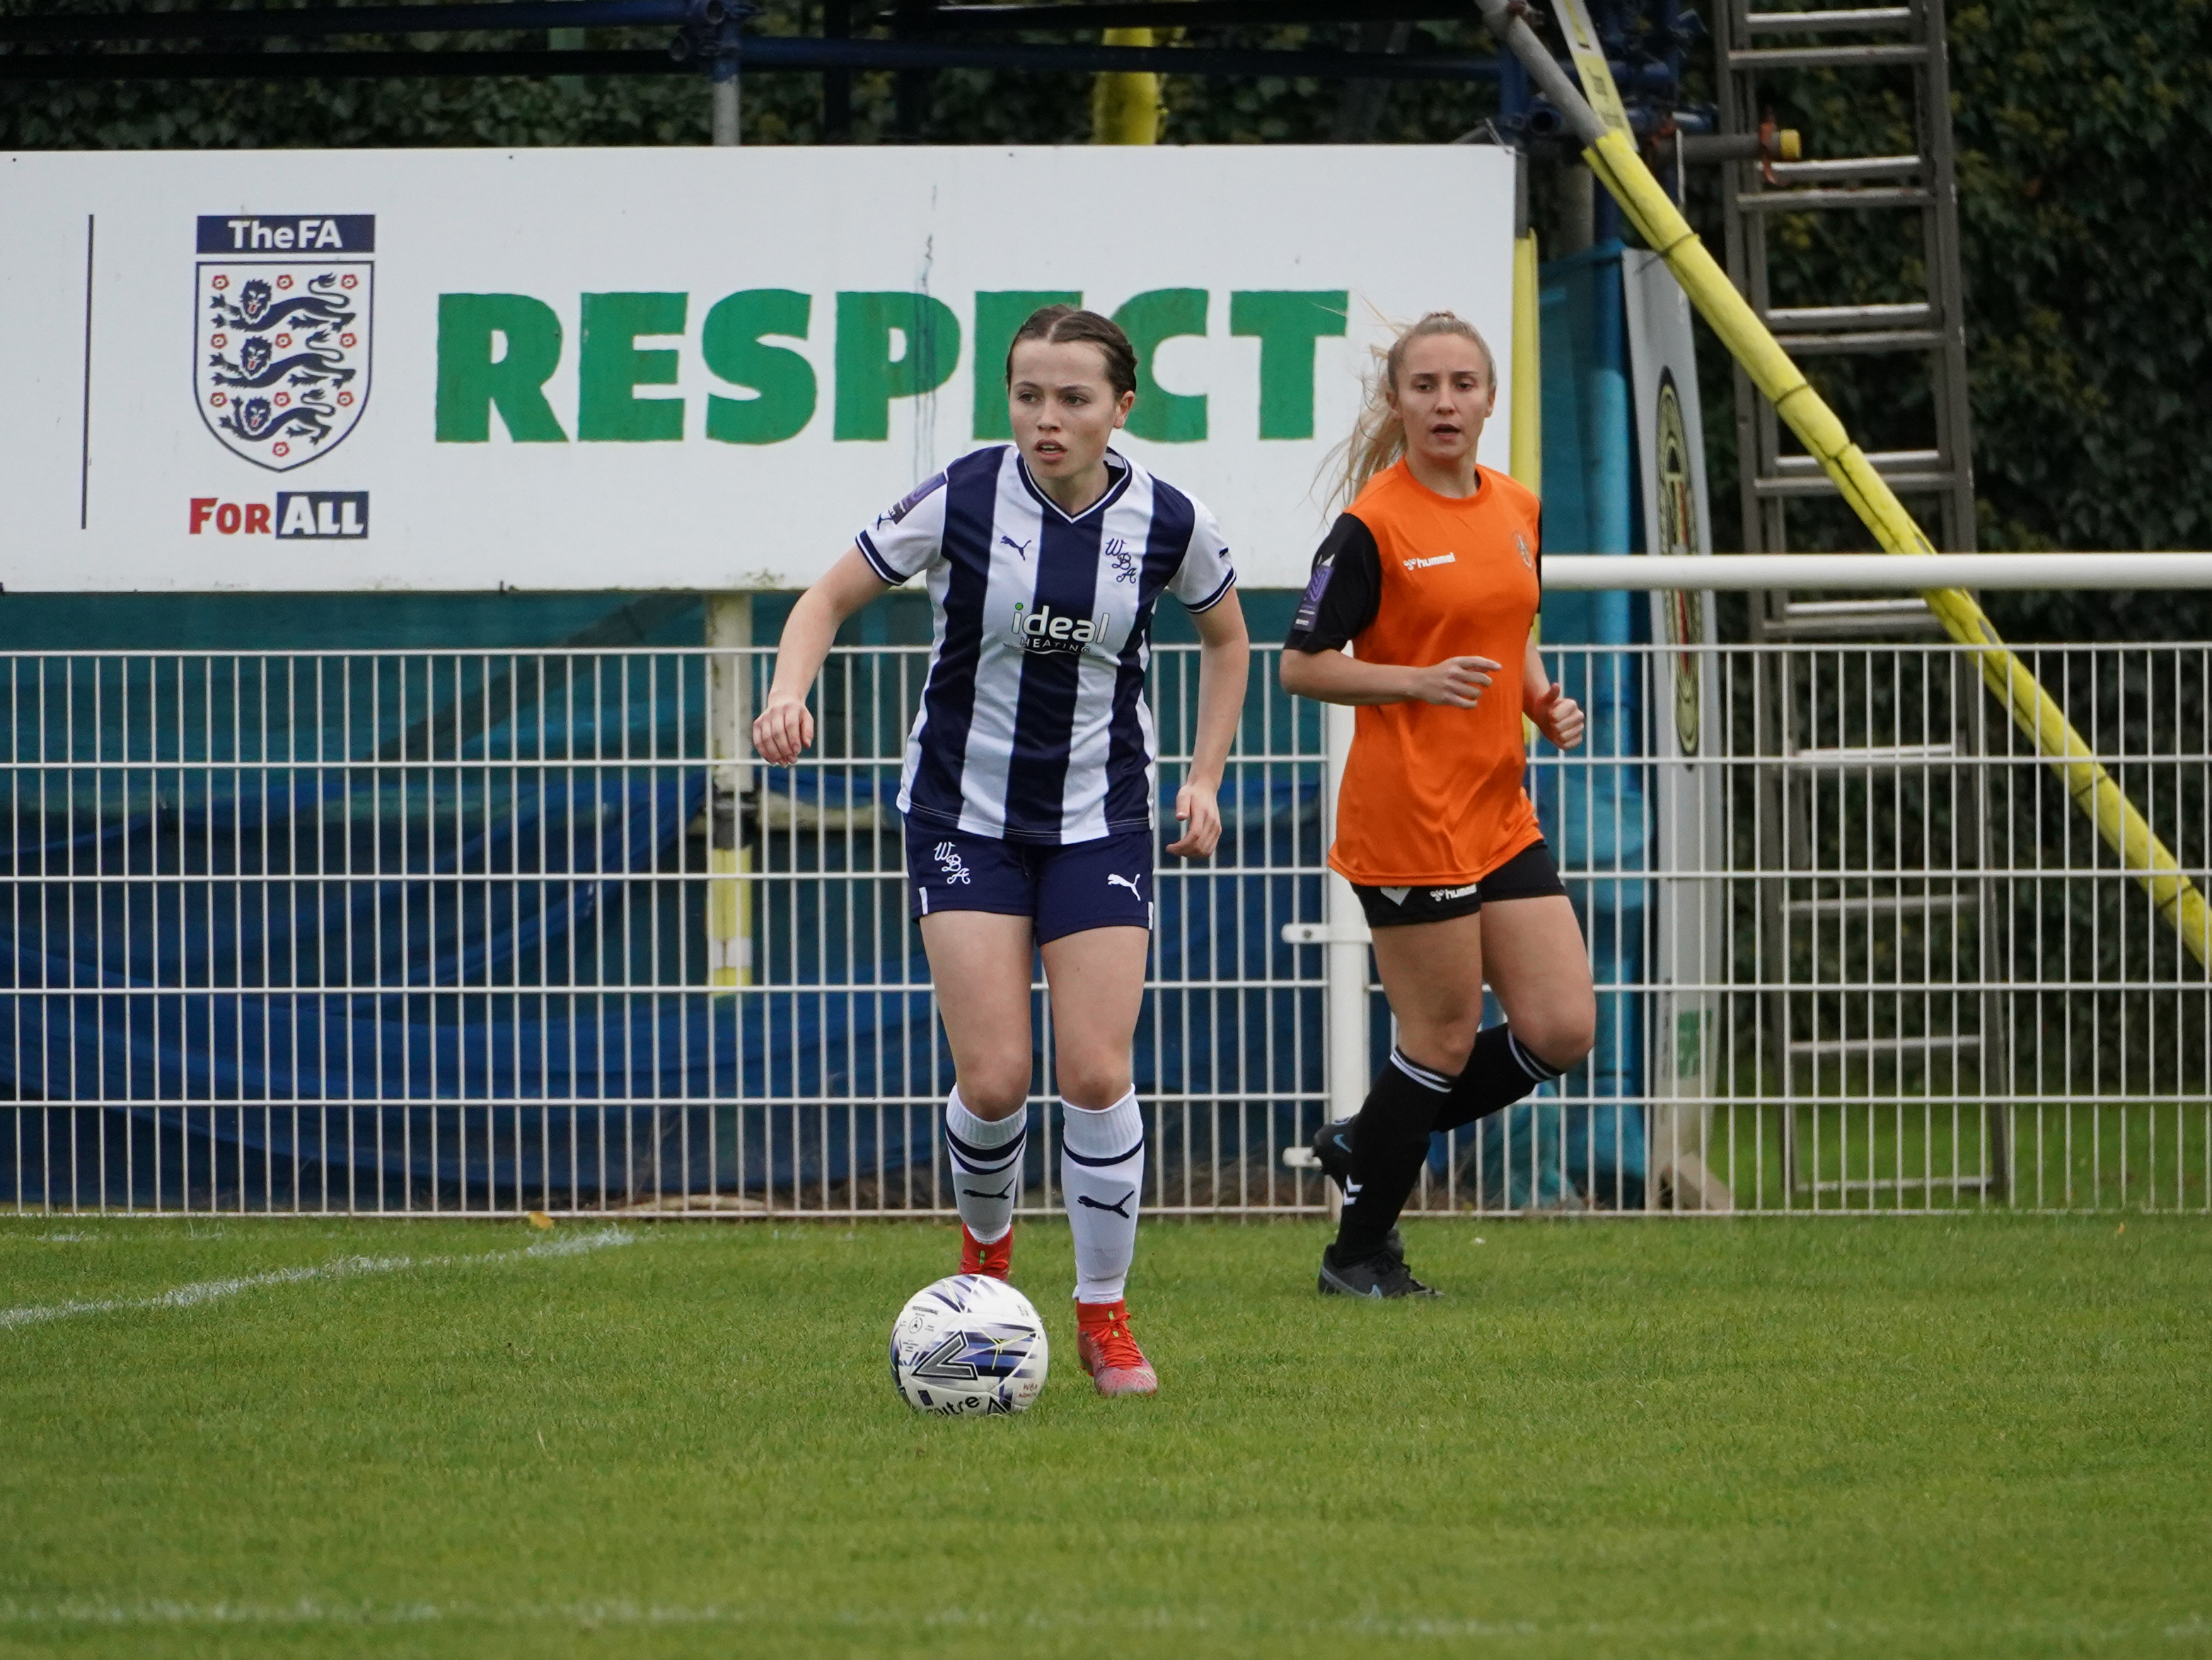 An image of Albion Women's player Abi Loydon on the ball during a match